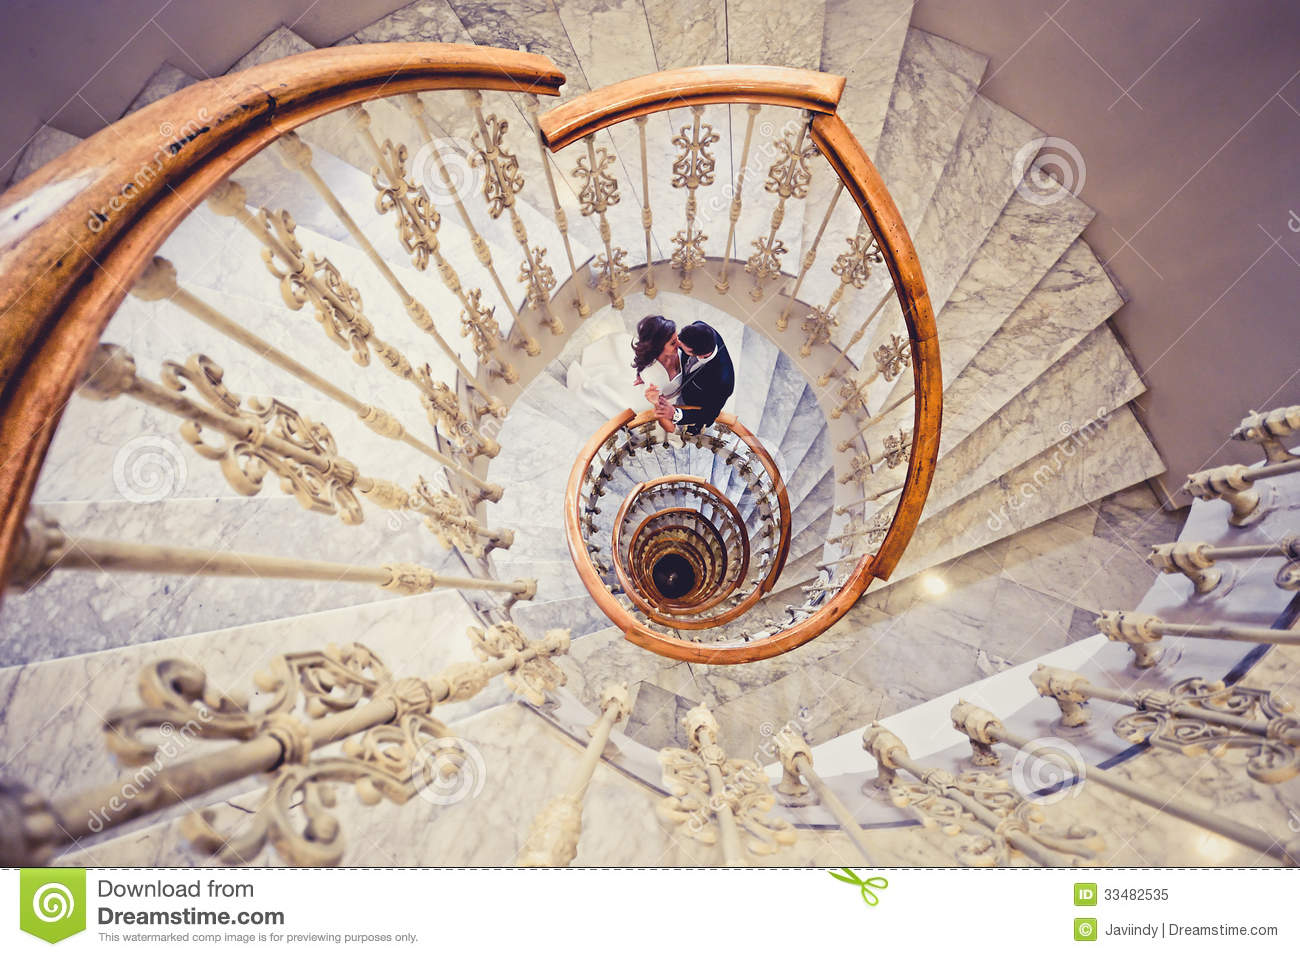 Just Married Couple In A Spiral Staircase Royalty Free Stock Photo